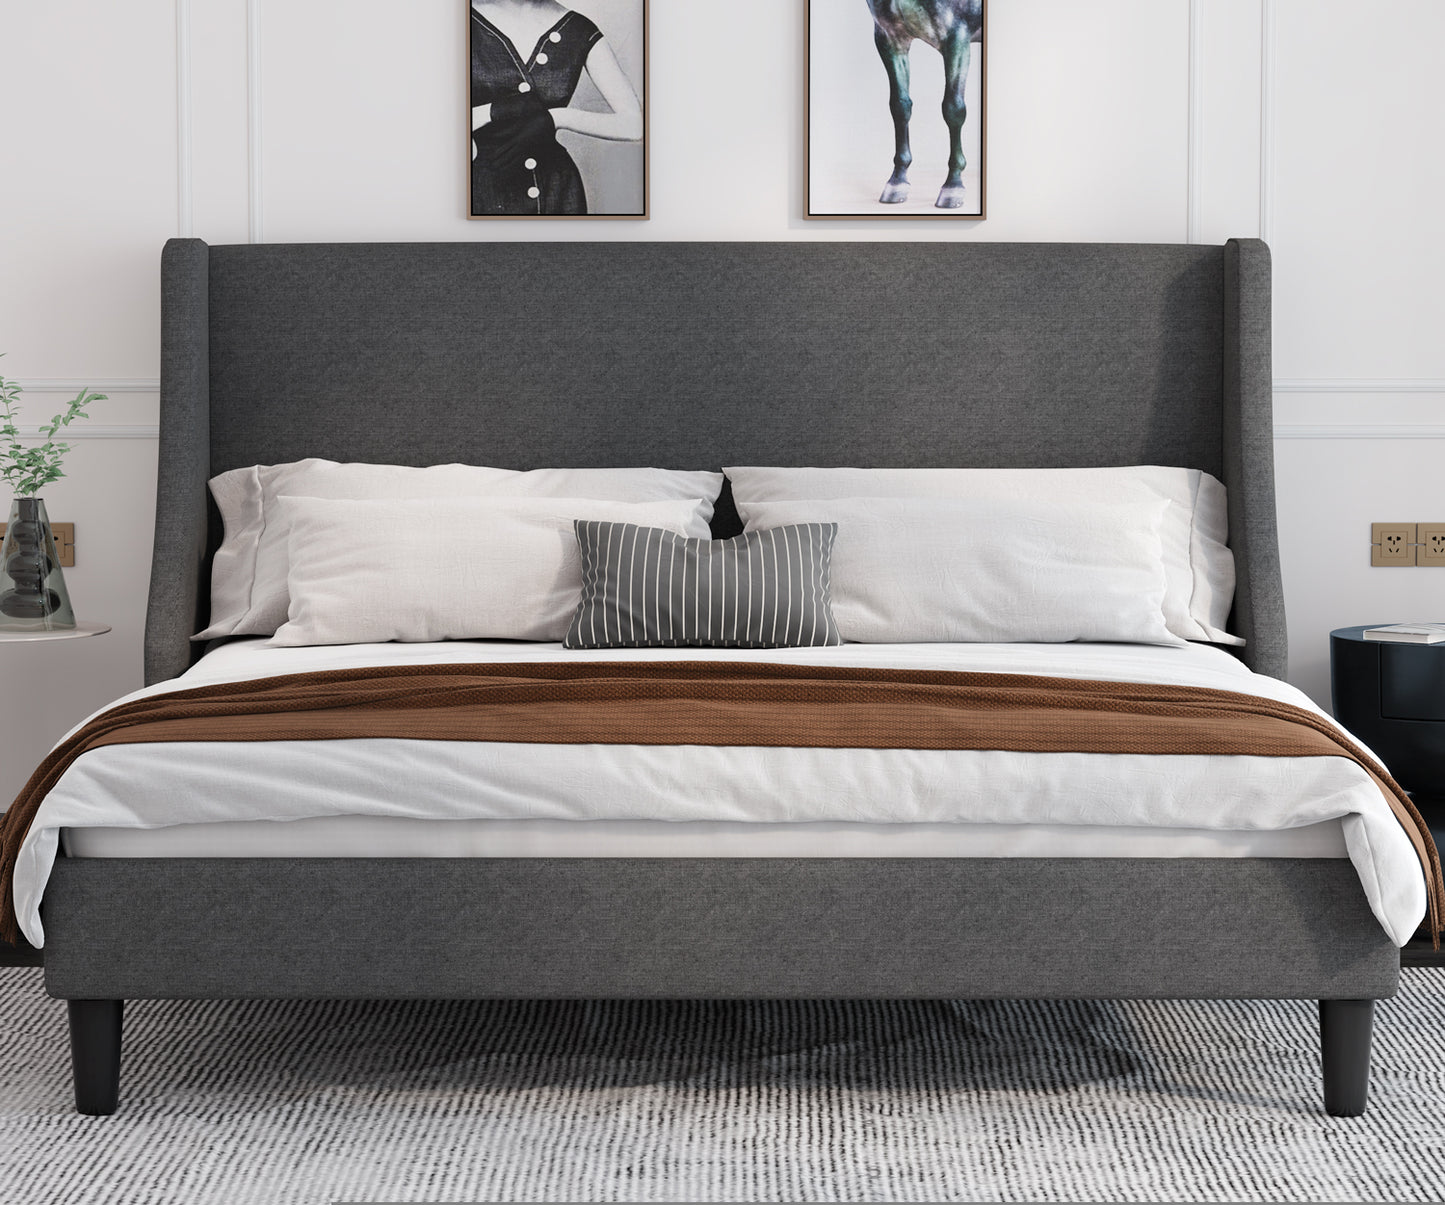 Allewie Queen Size Fabric Upholstered Platform Bed Frame with Wingback Headboard, Light Grey